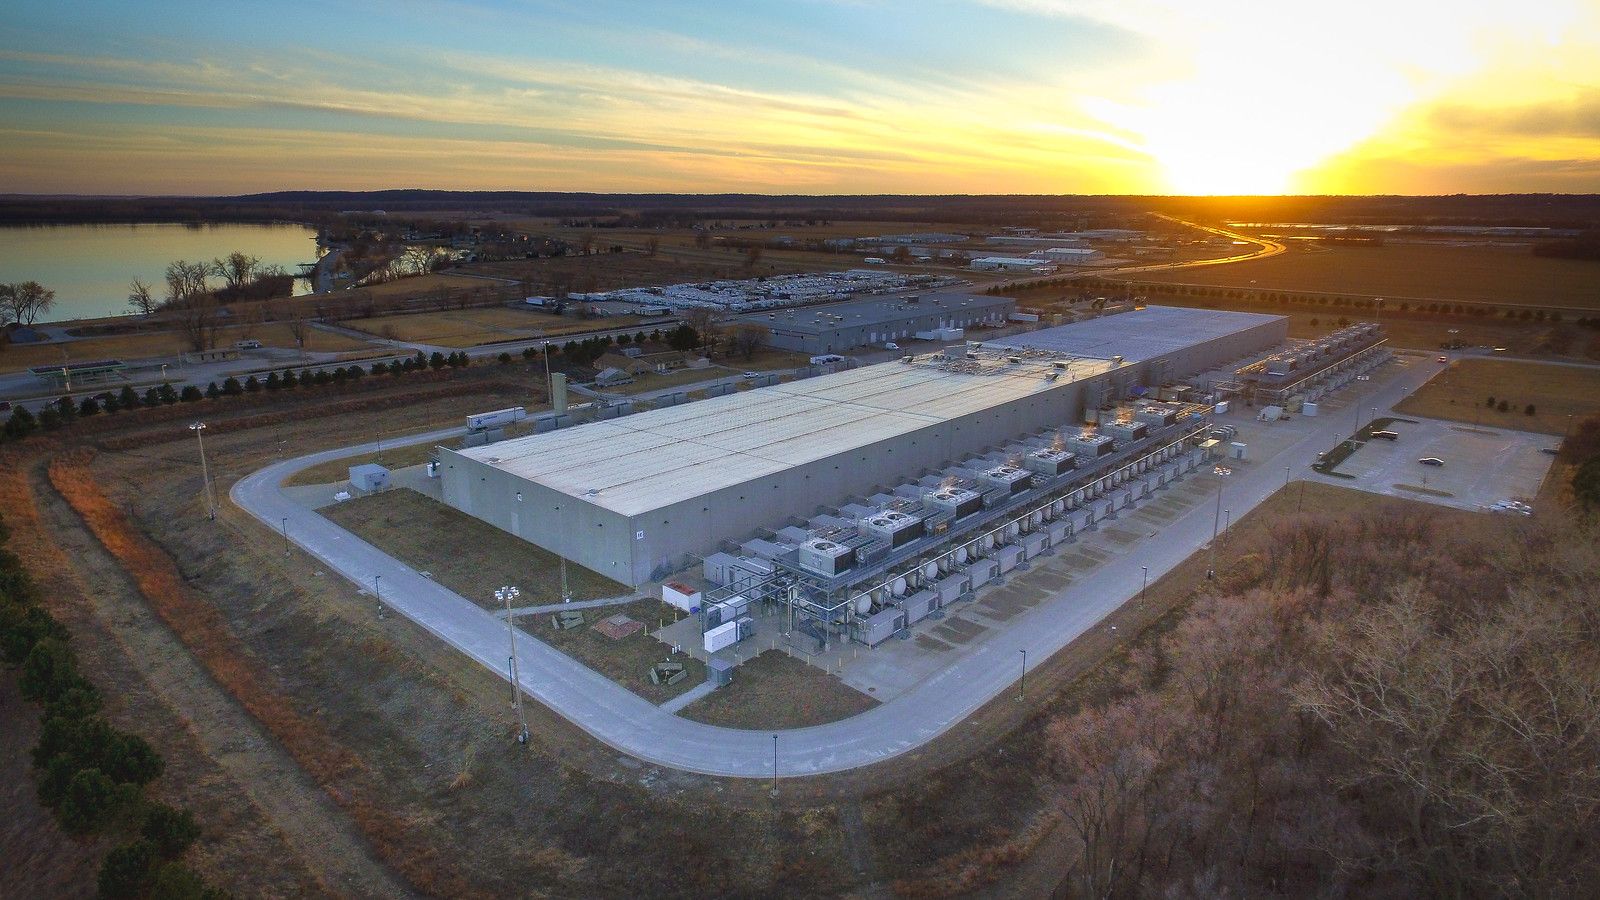 The world's biggest data center is located in the US